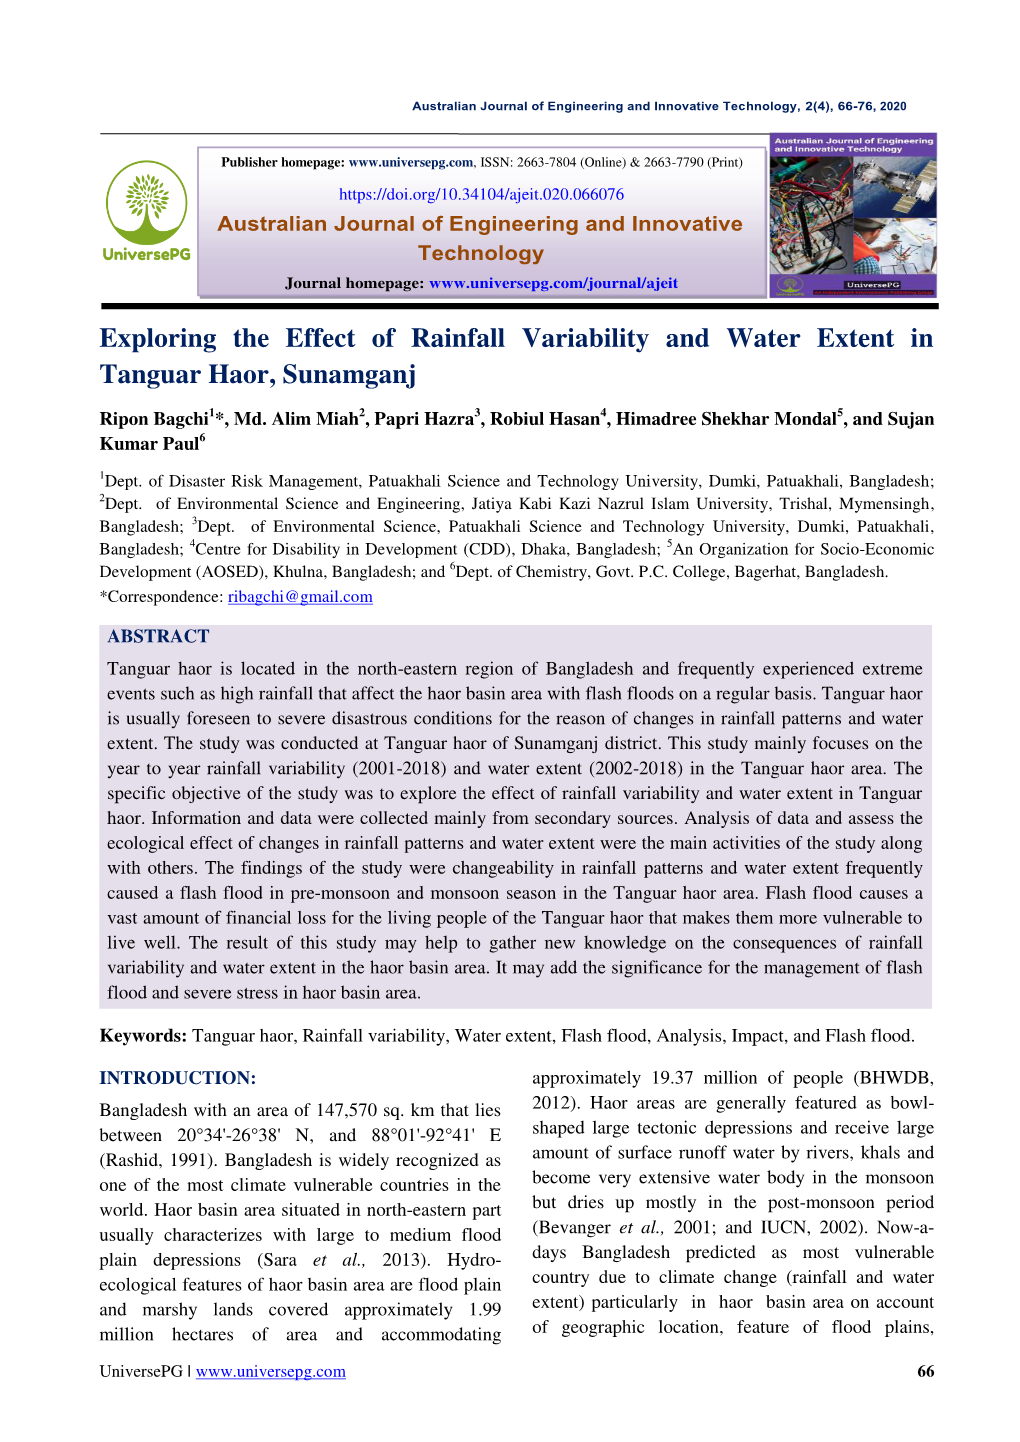 Exploring the Effect of Rainfall Variability and Water Extent in Tanguar Haor, Sunamganj